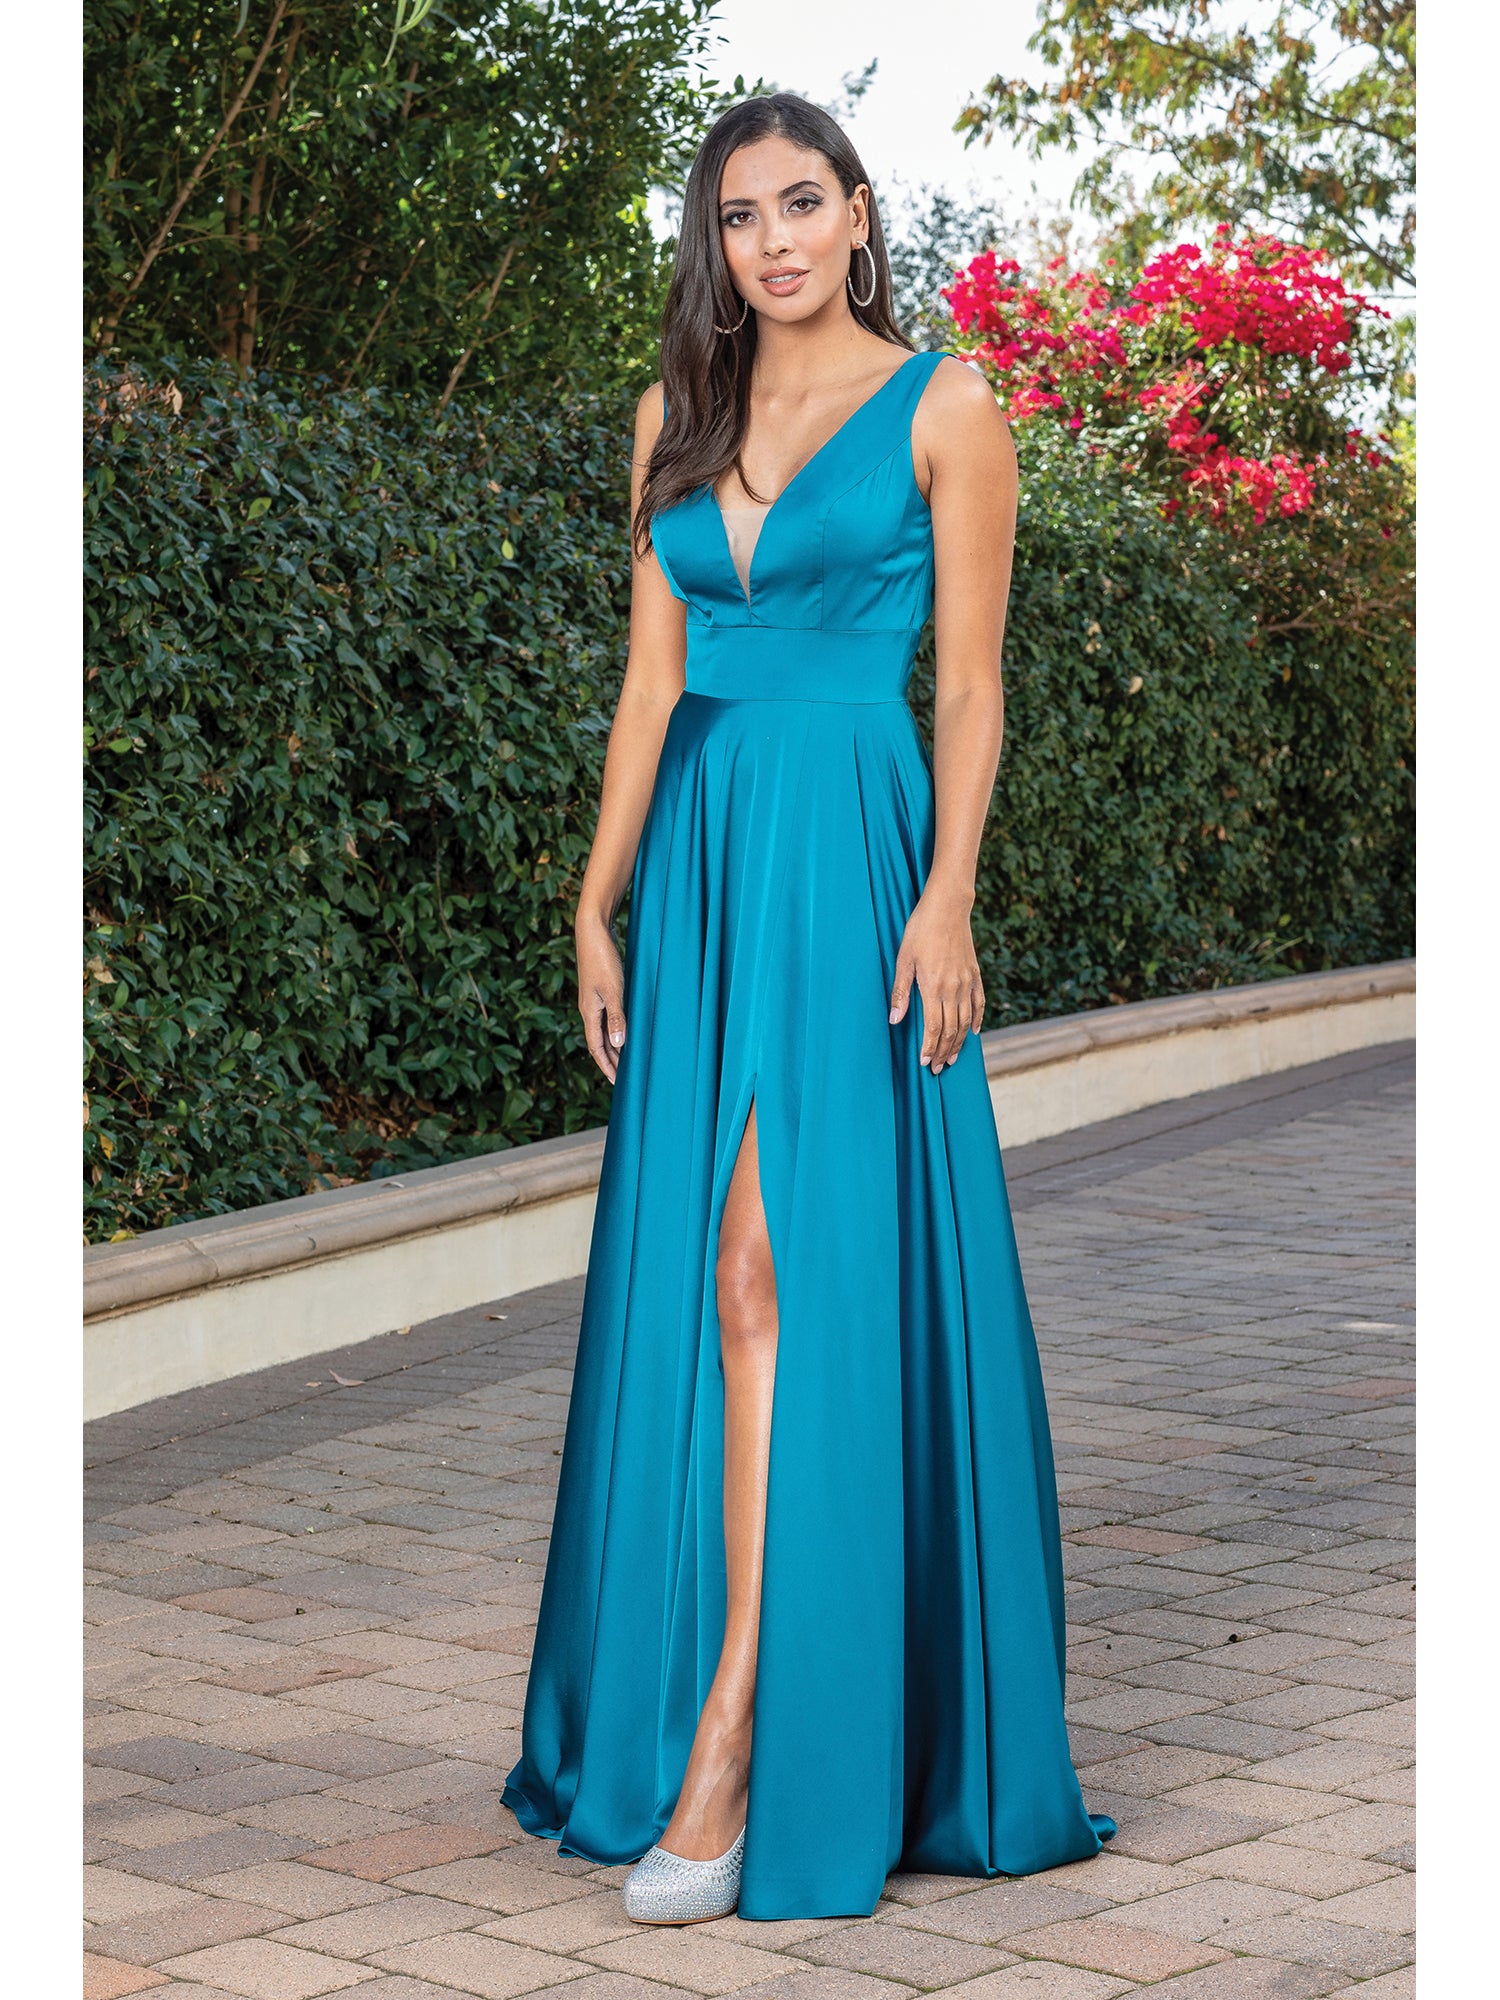 Teal Satin A-Line Classic Long Prom Dress